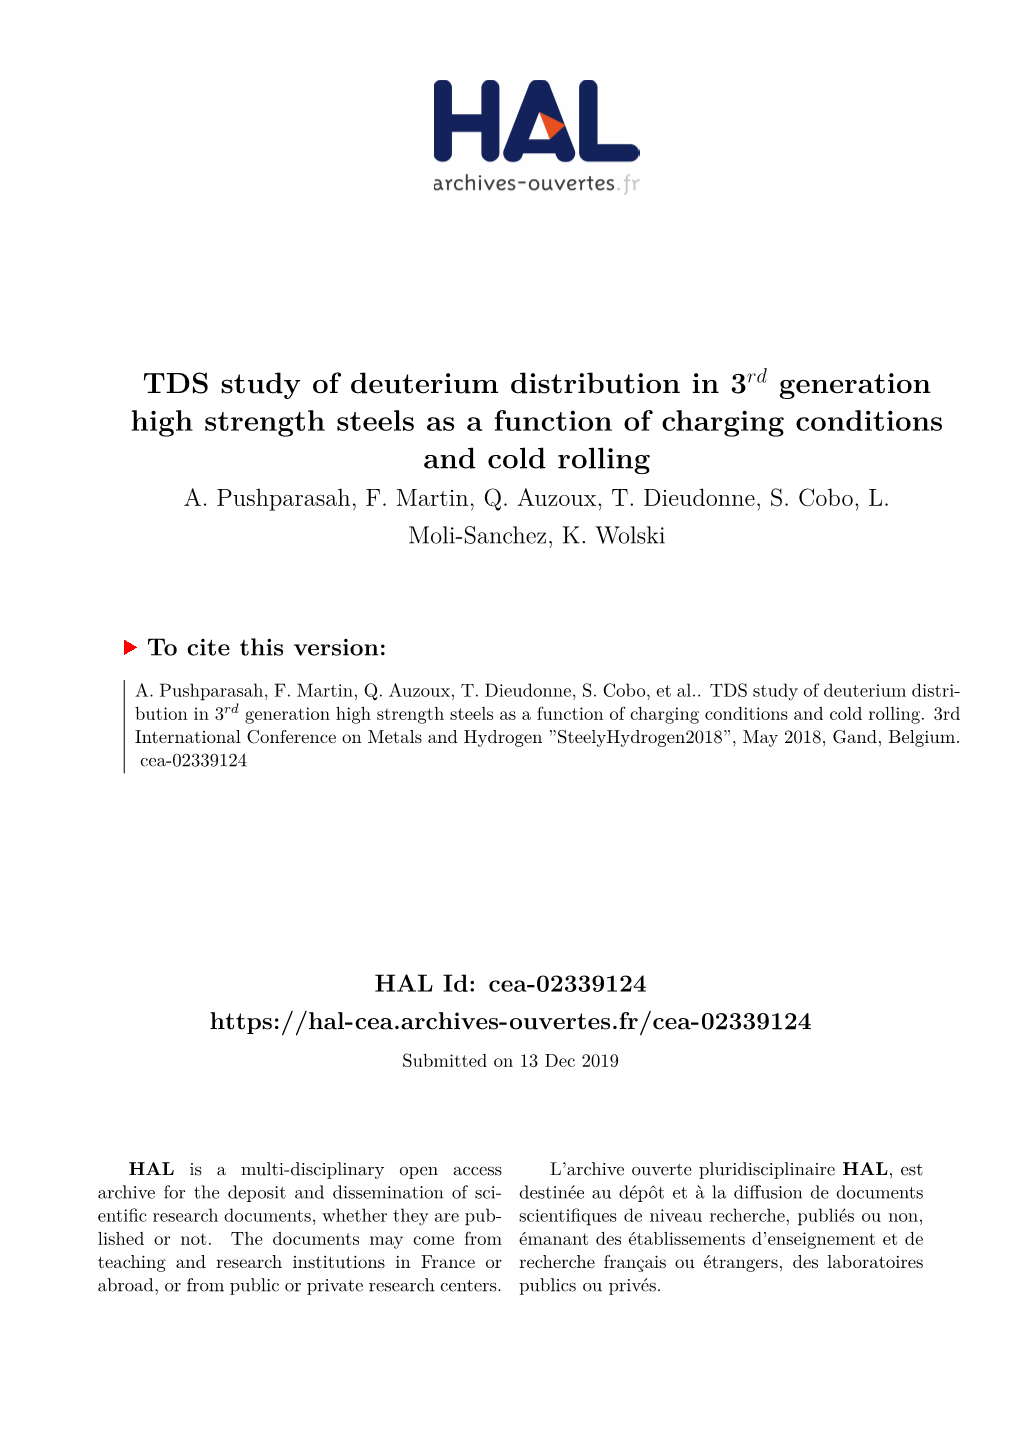 TDS Study of Deuterium Distribution in 3Rd Generation High Strength Steels As a Function of Charging Conditions and Cold Rolling A